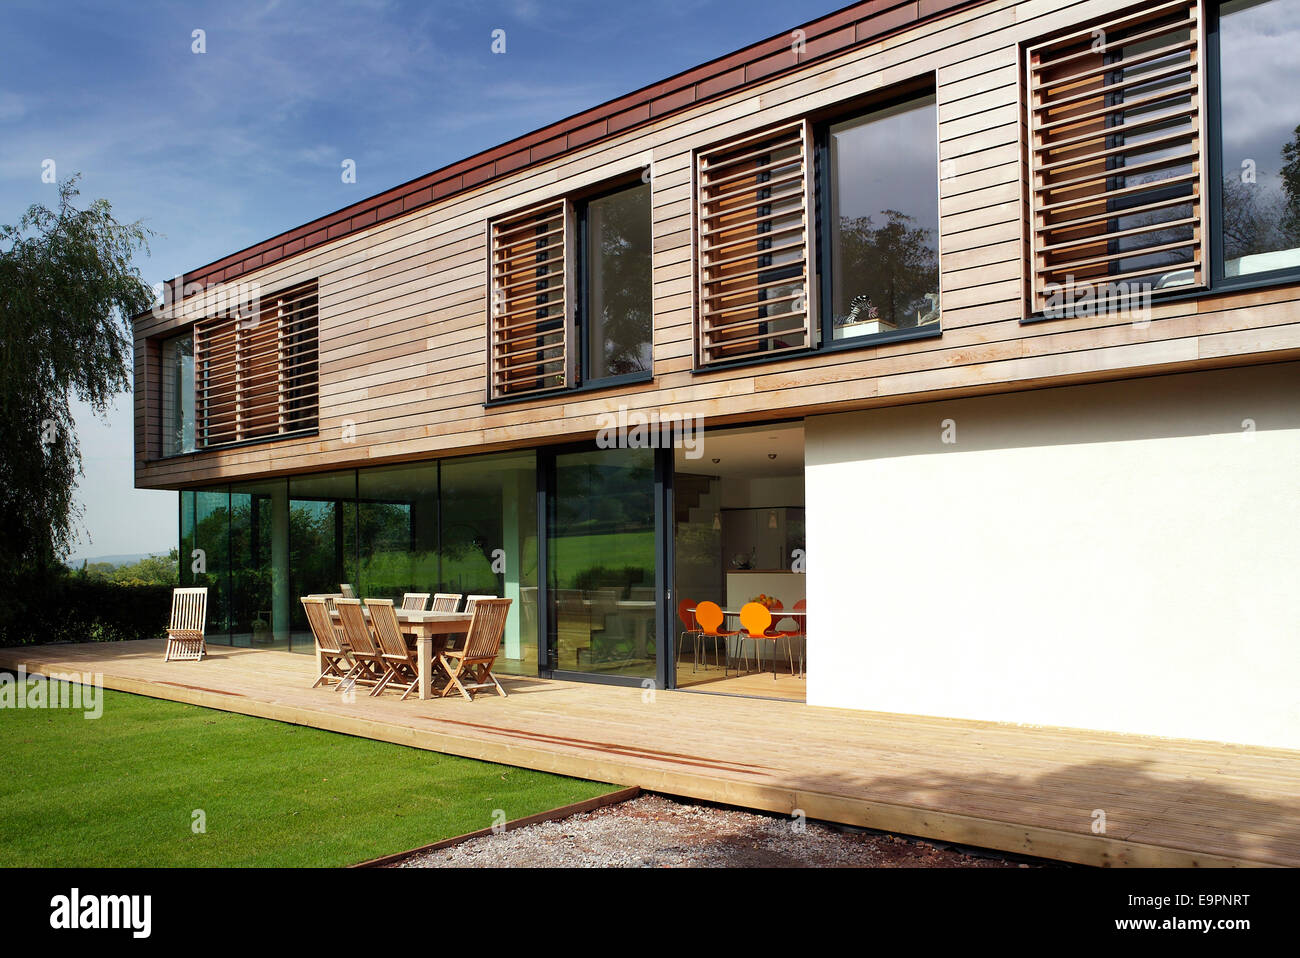 Outdoor terrace with furniture on modern exterior of wood clad residential house in Trees- Ubly, Somerset, England, UK. Stock Photo